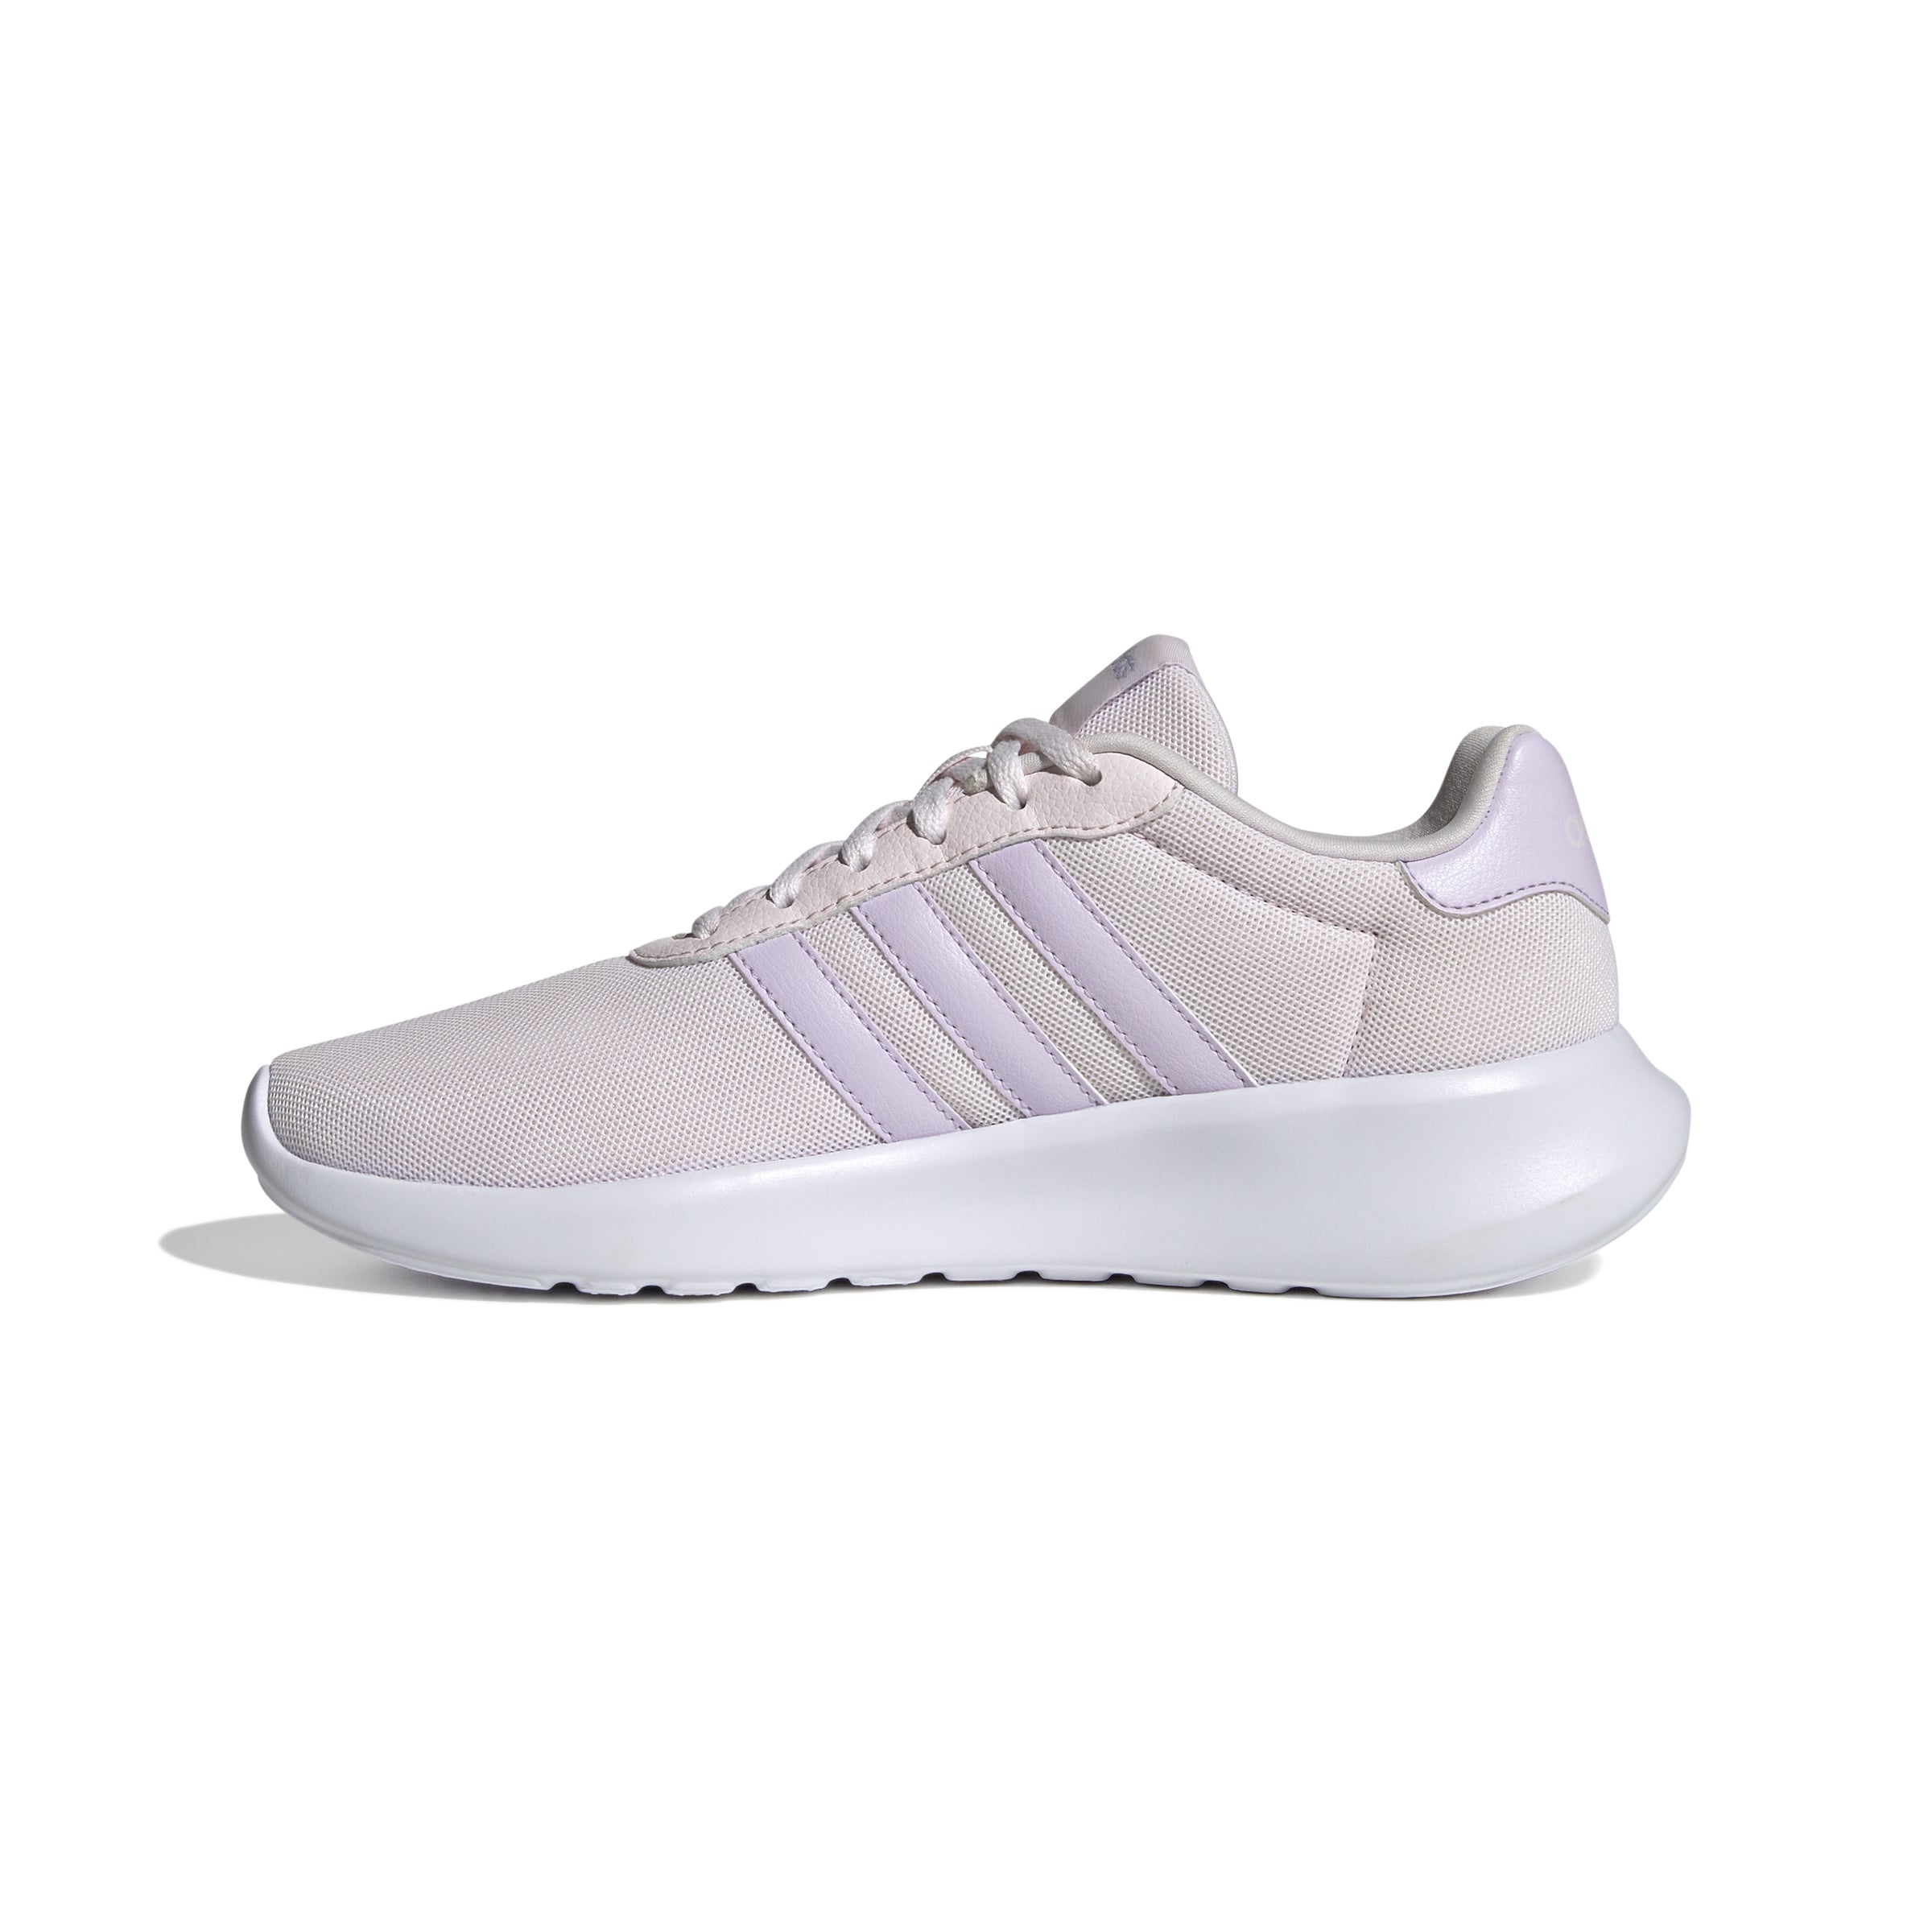 ADIDAS LITE RACER 3.0 IG3613 RUNNING SHOES (W)